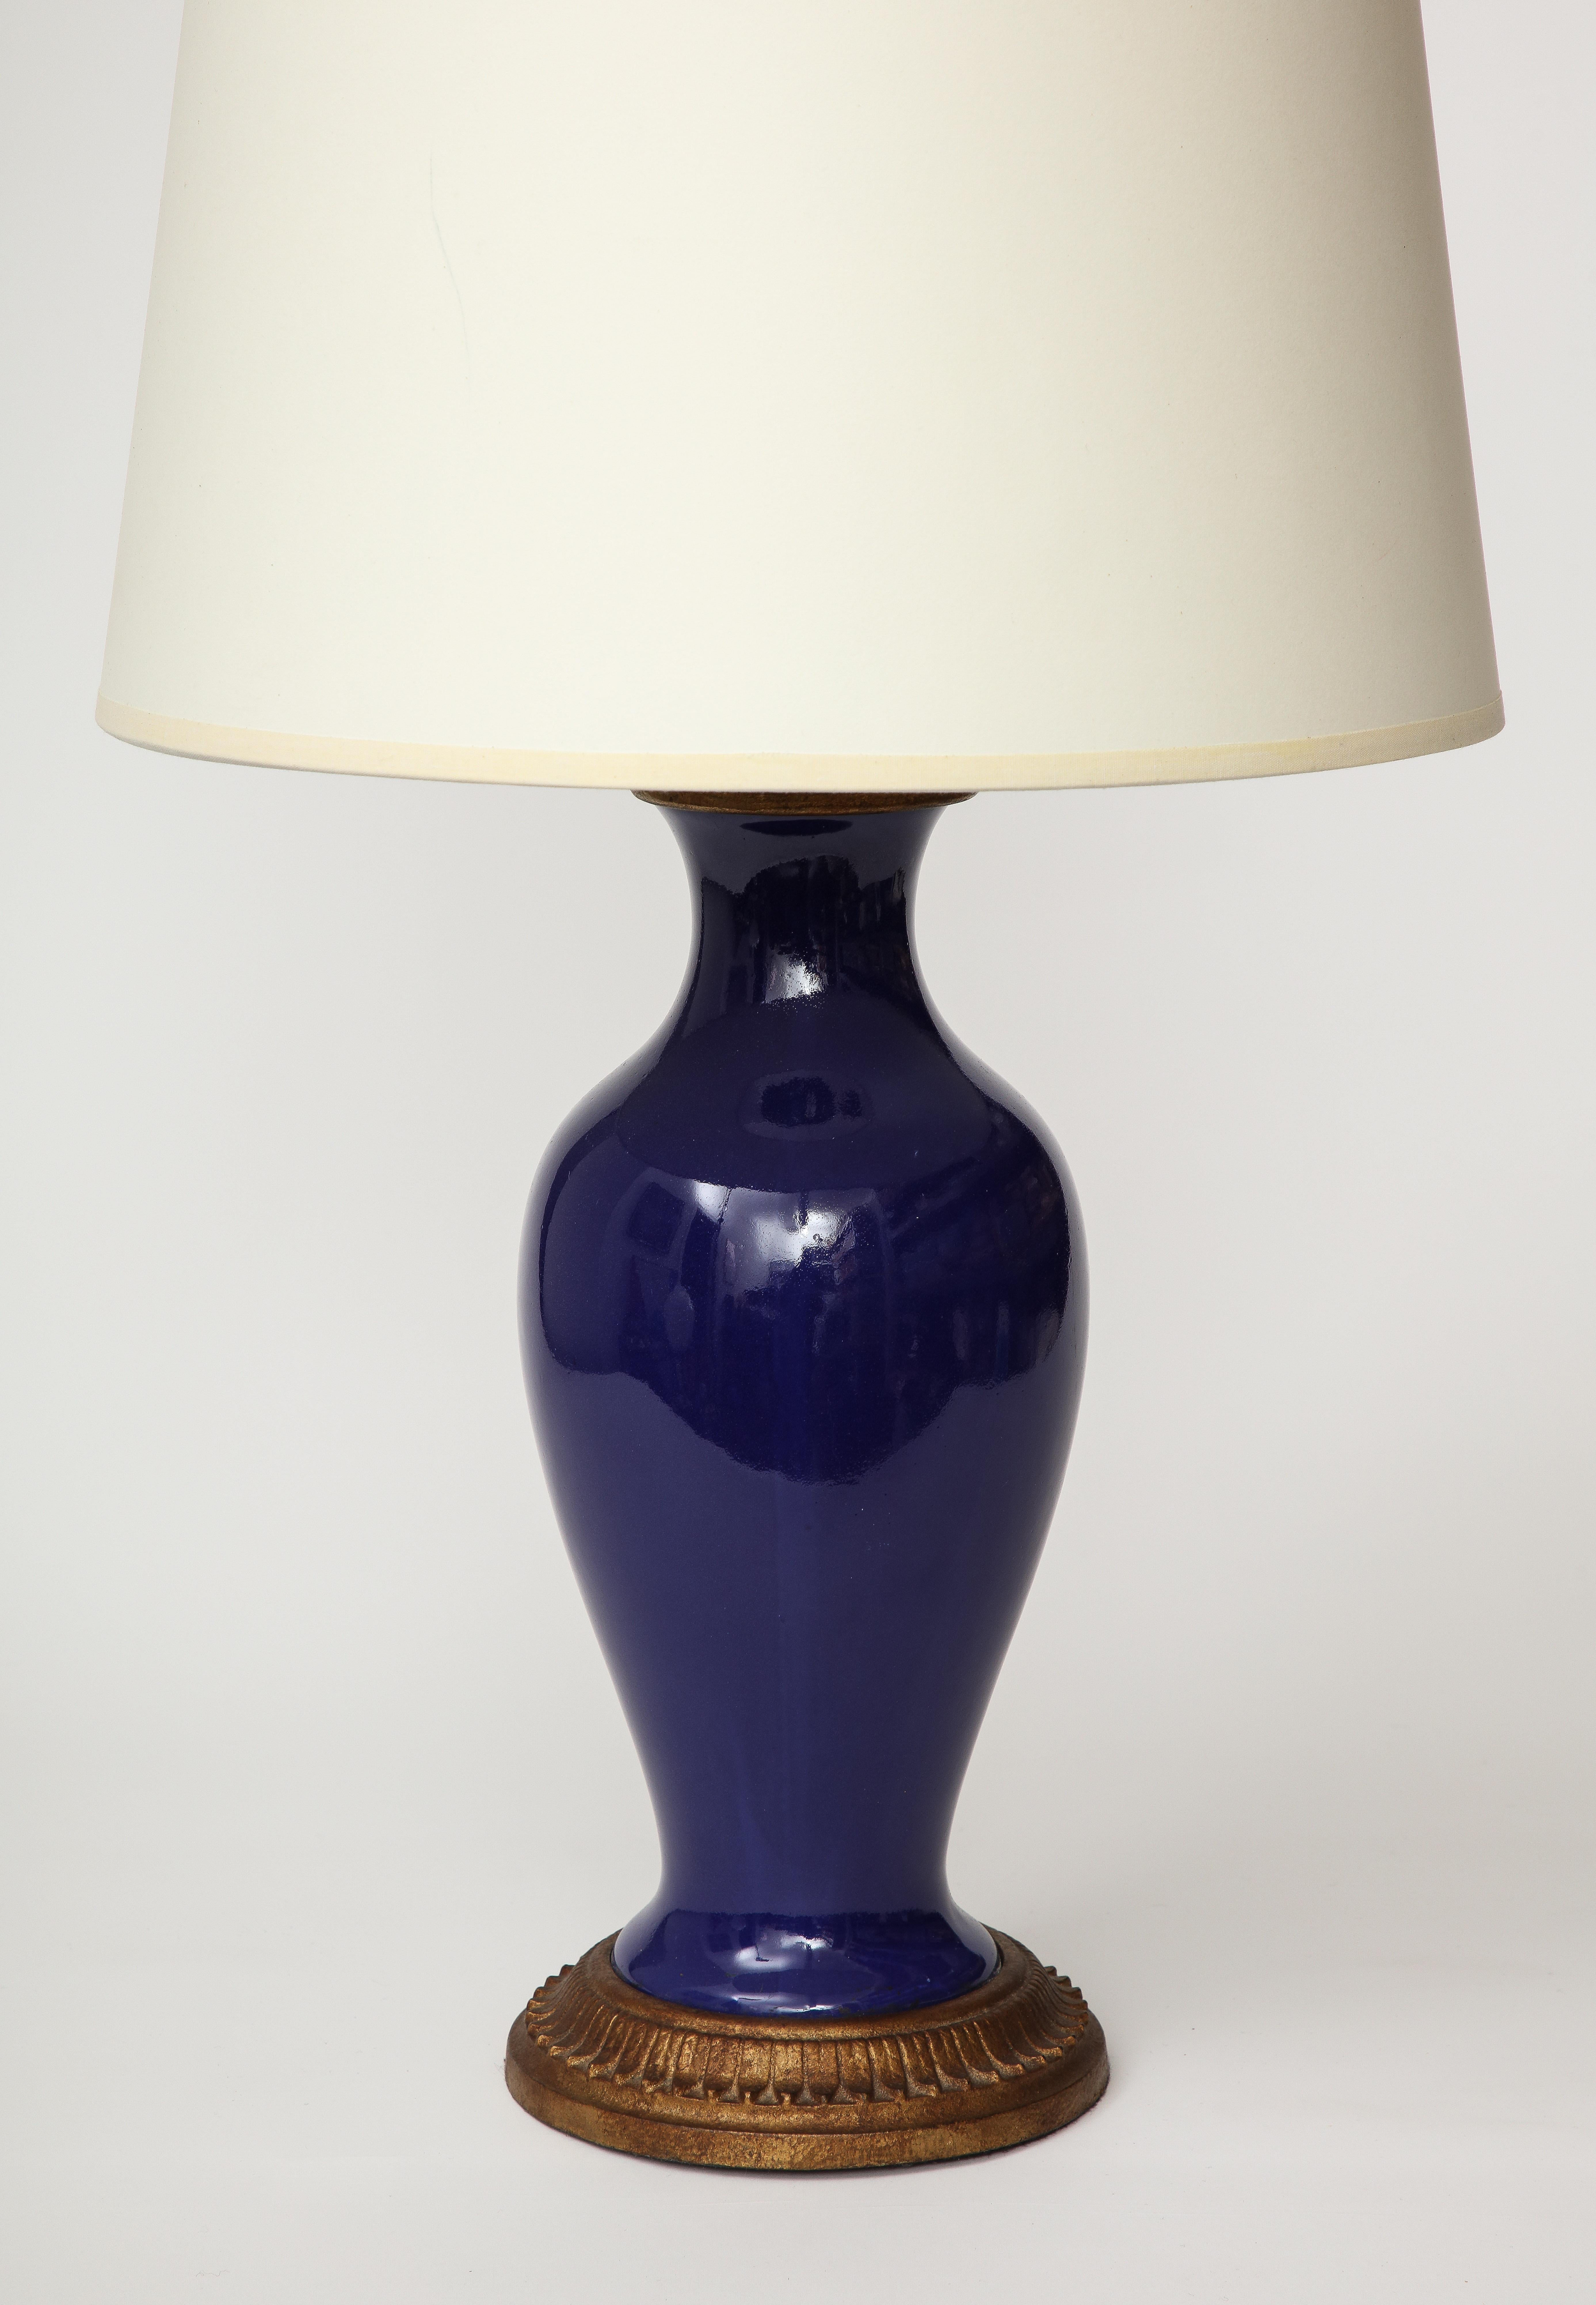 Copper and Lapis Blue Enamel Table Lamp, 20th C. In Excellent Condition For Sale In New York City, NY